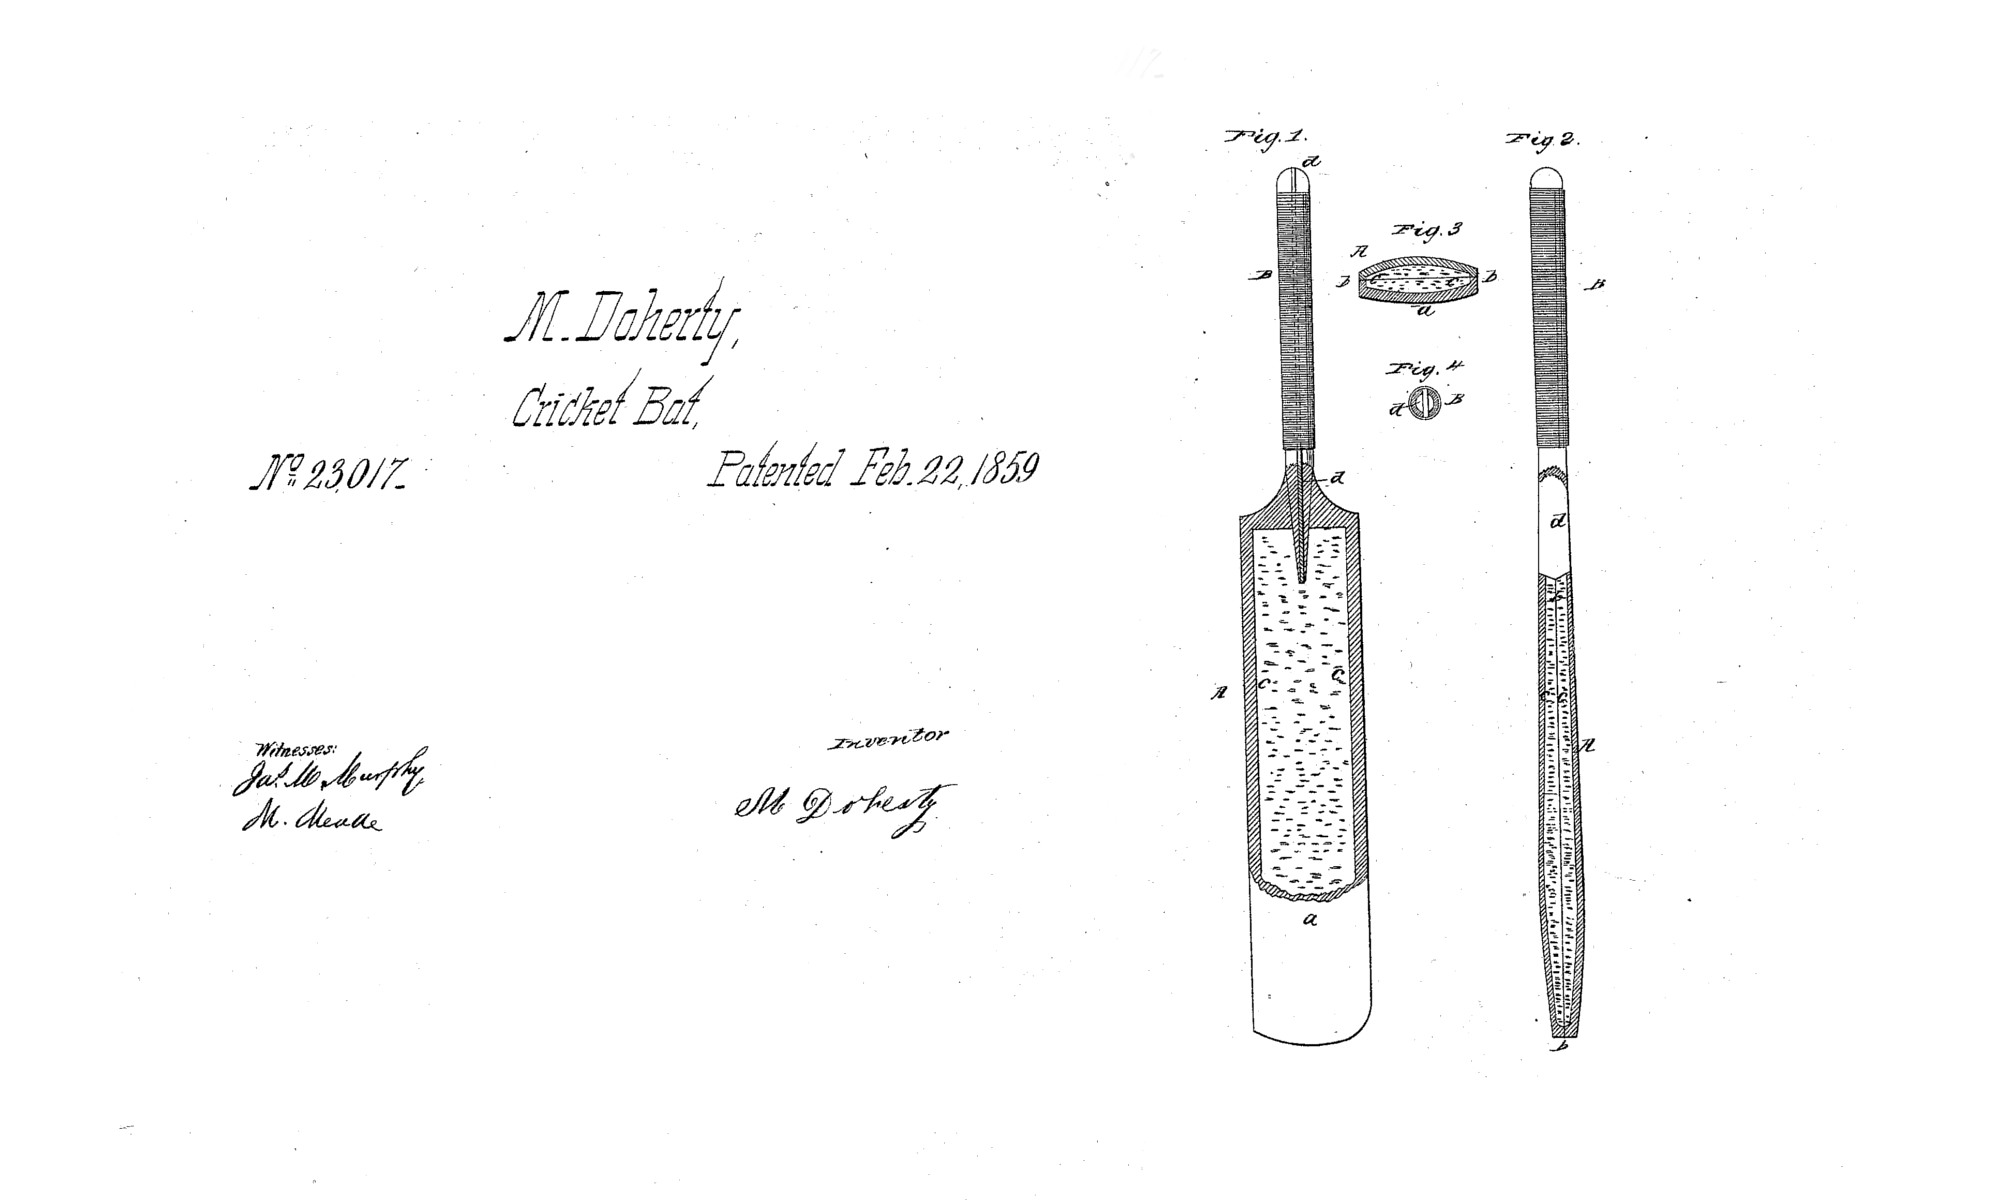 #OnThisDay in 1859 – Doherty files Patent for Cricket Bat Improvements